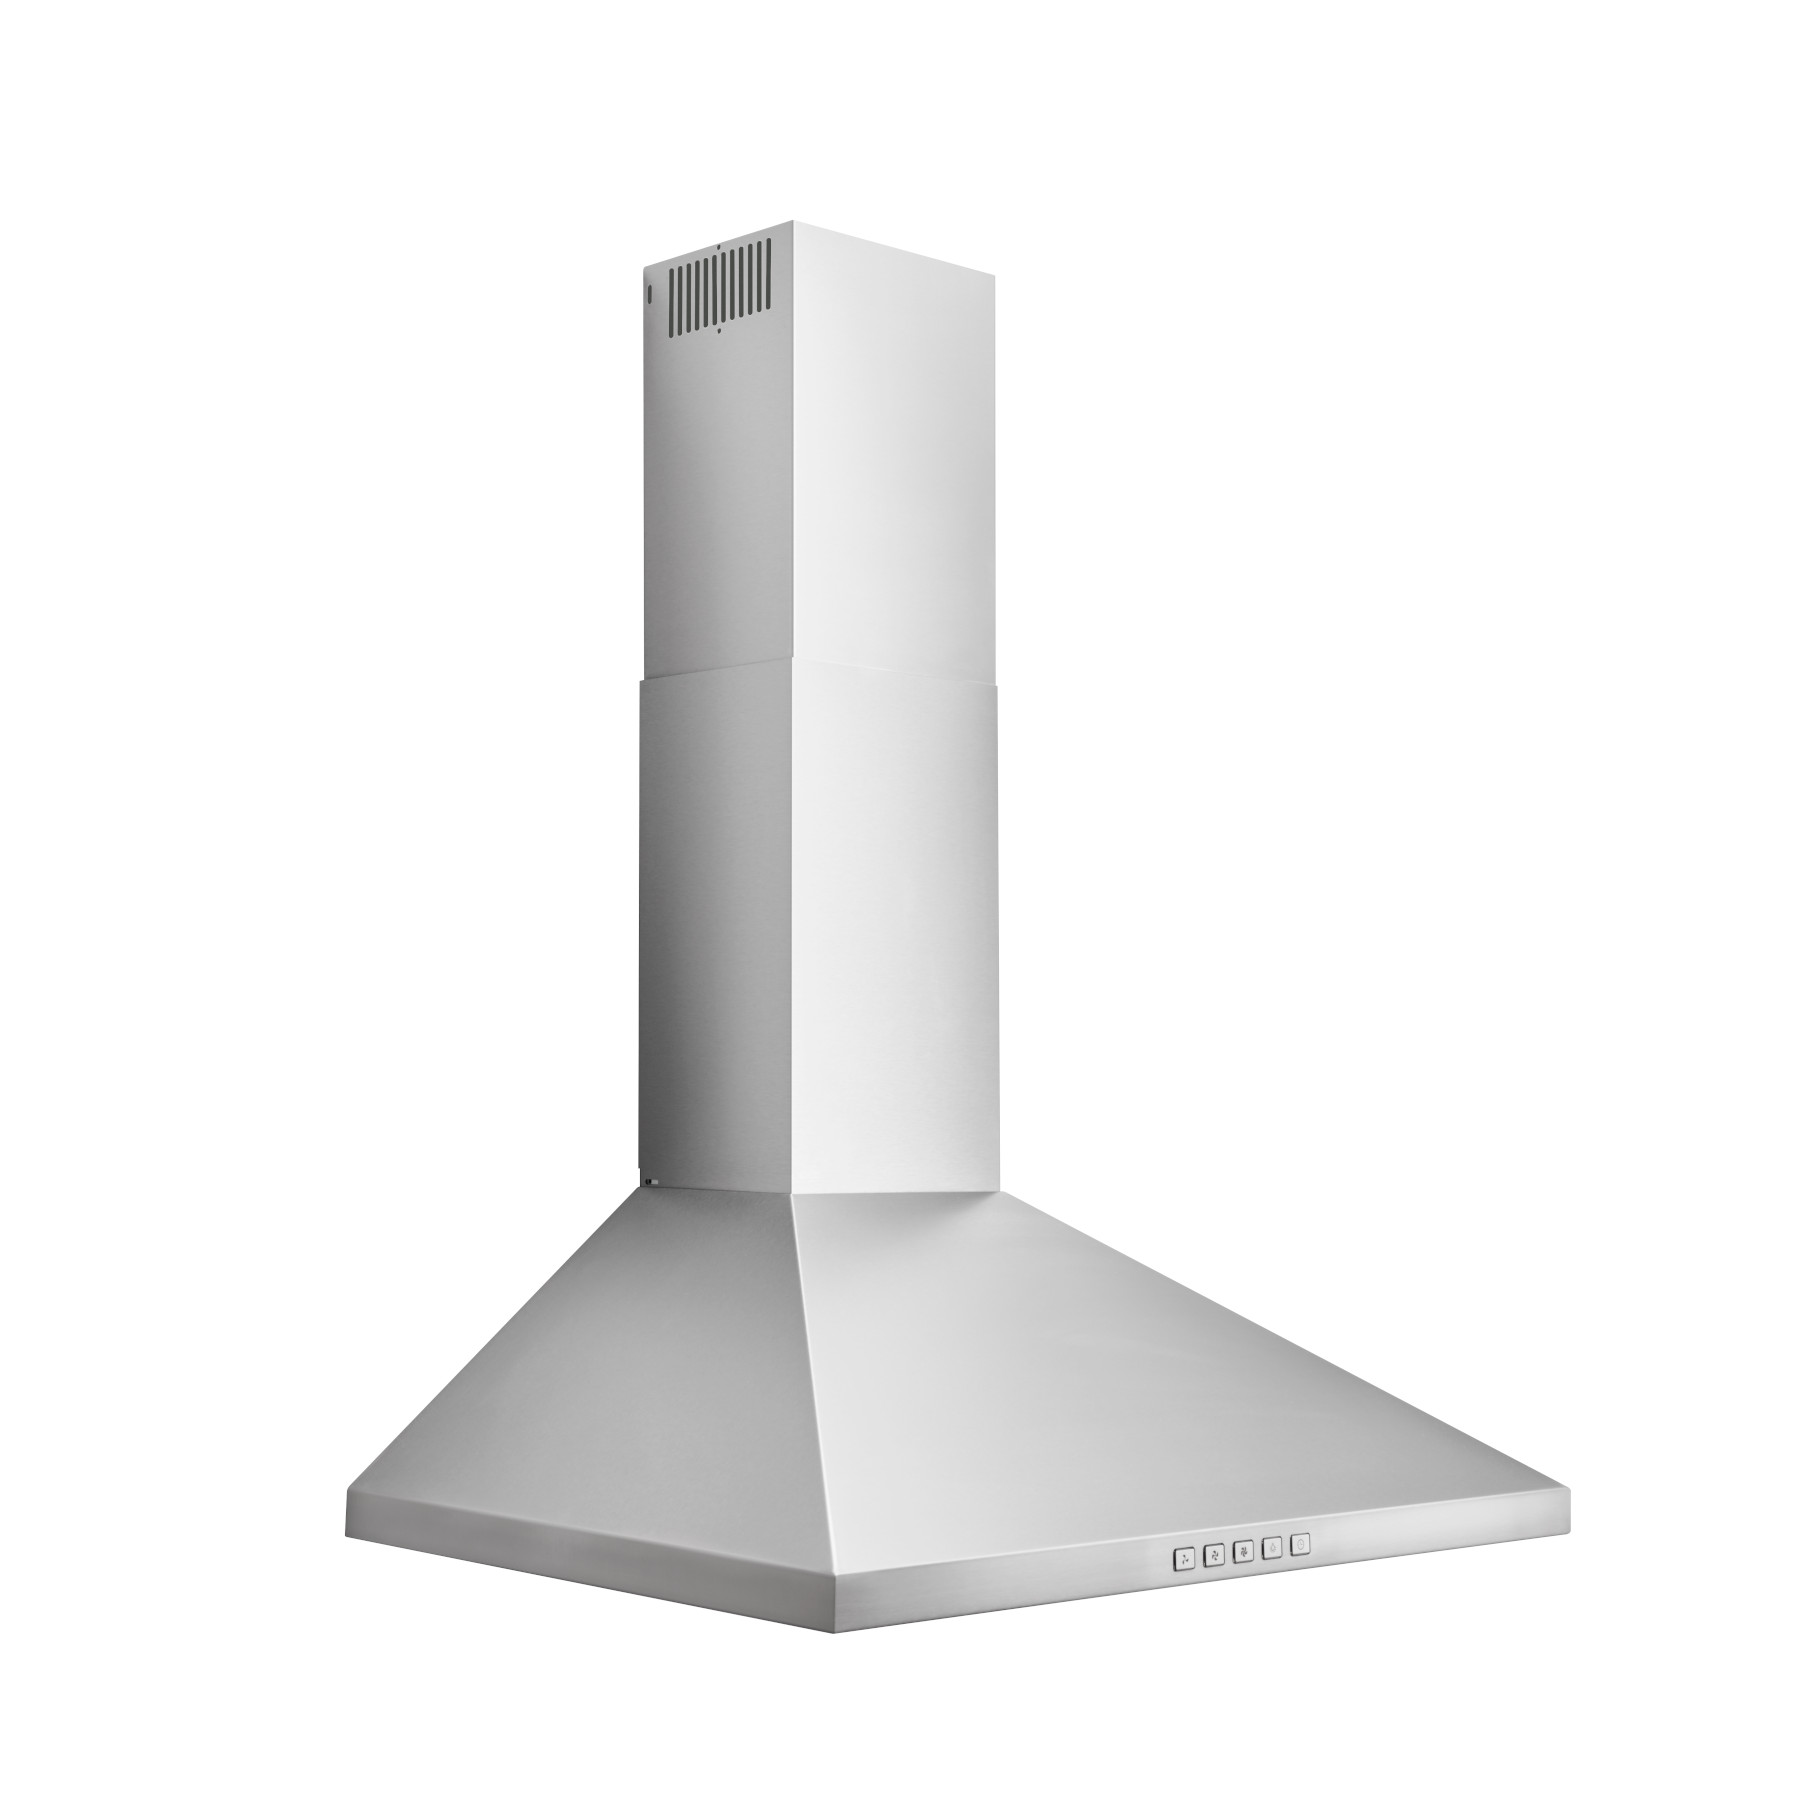 **DISCONTINUED** Broan® 24-Inch Convertible Wall-Mount Pyramidal Chimney Range Hood, 450 MAX CFM, Stainless Steel